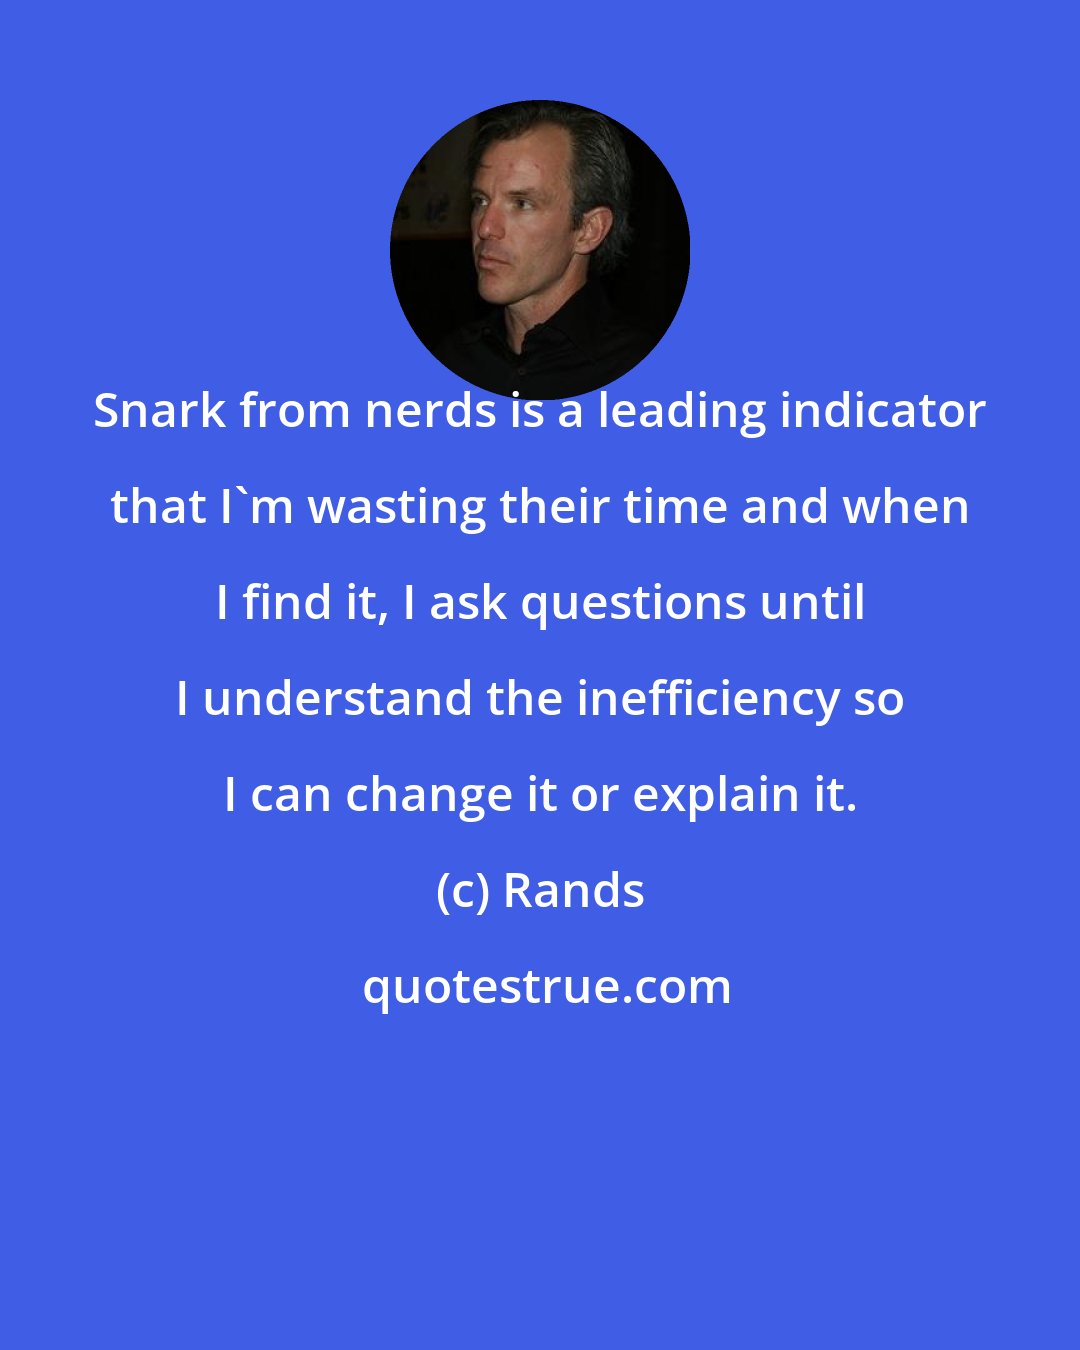 Rands: Snark from nerds is a leading indicator that I'm wasting their time and when I find it, I ask questions until I understand the inefficiency so I can change it or explain it.